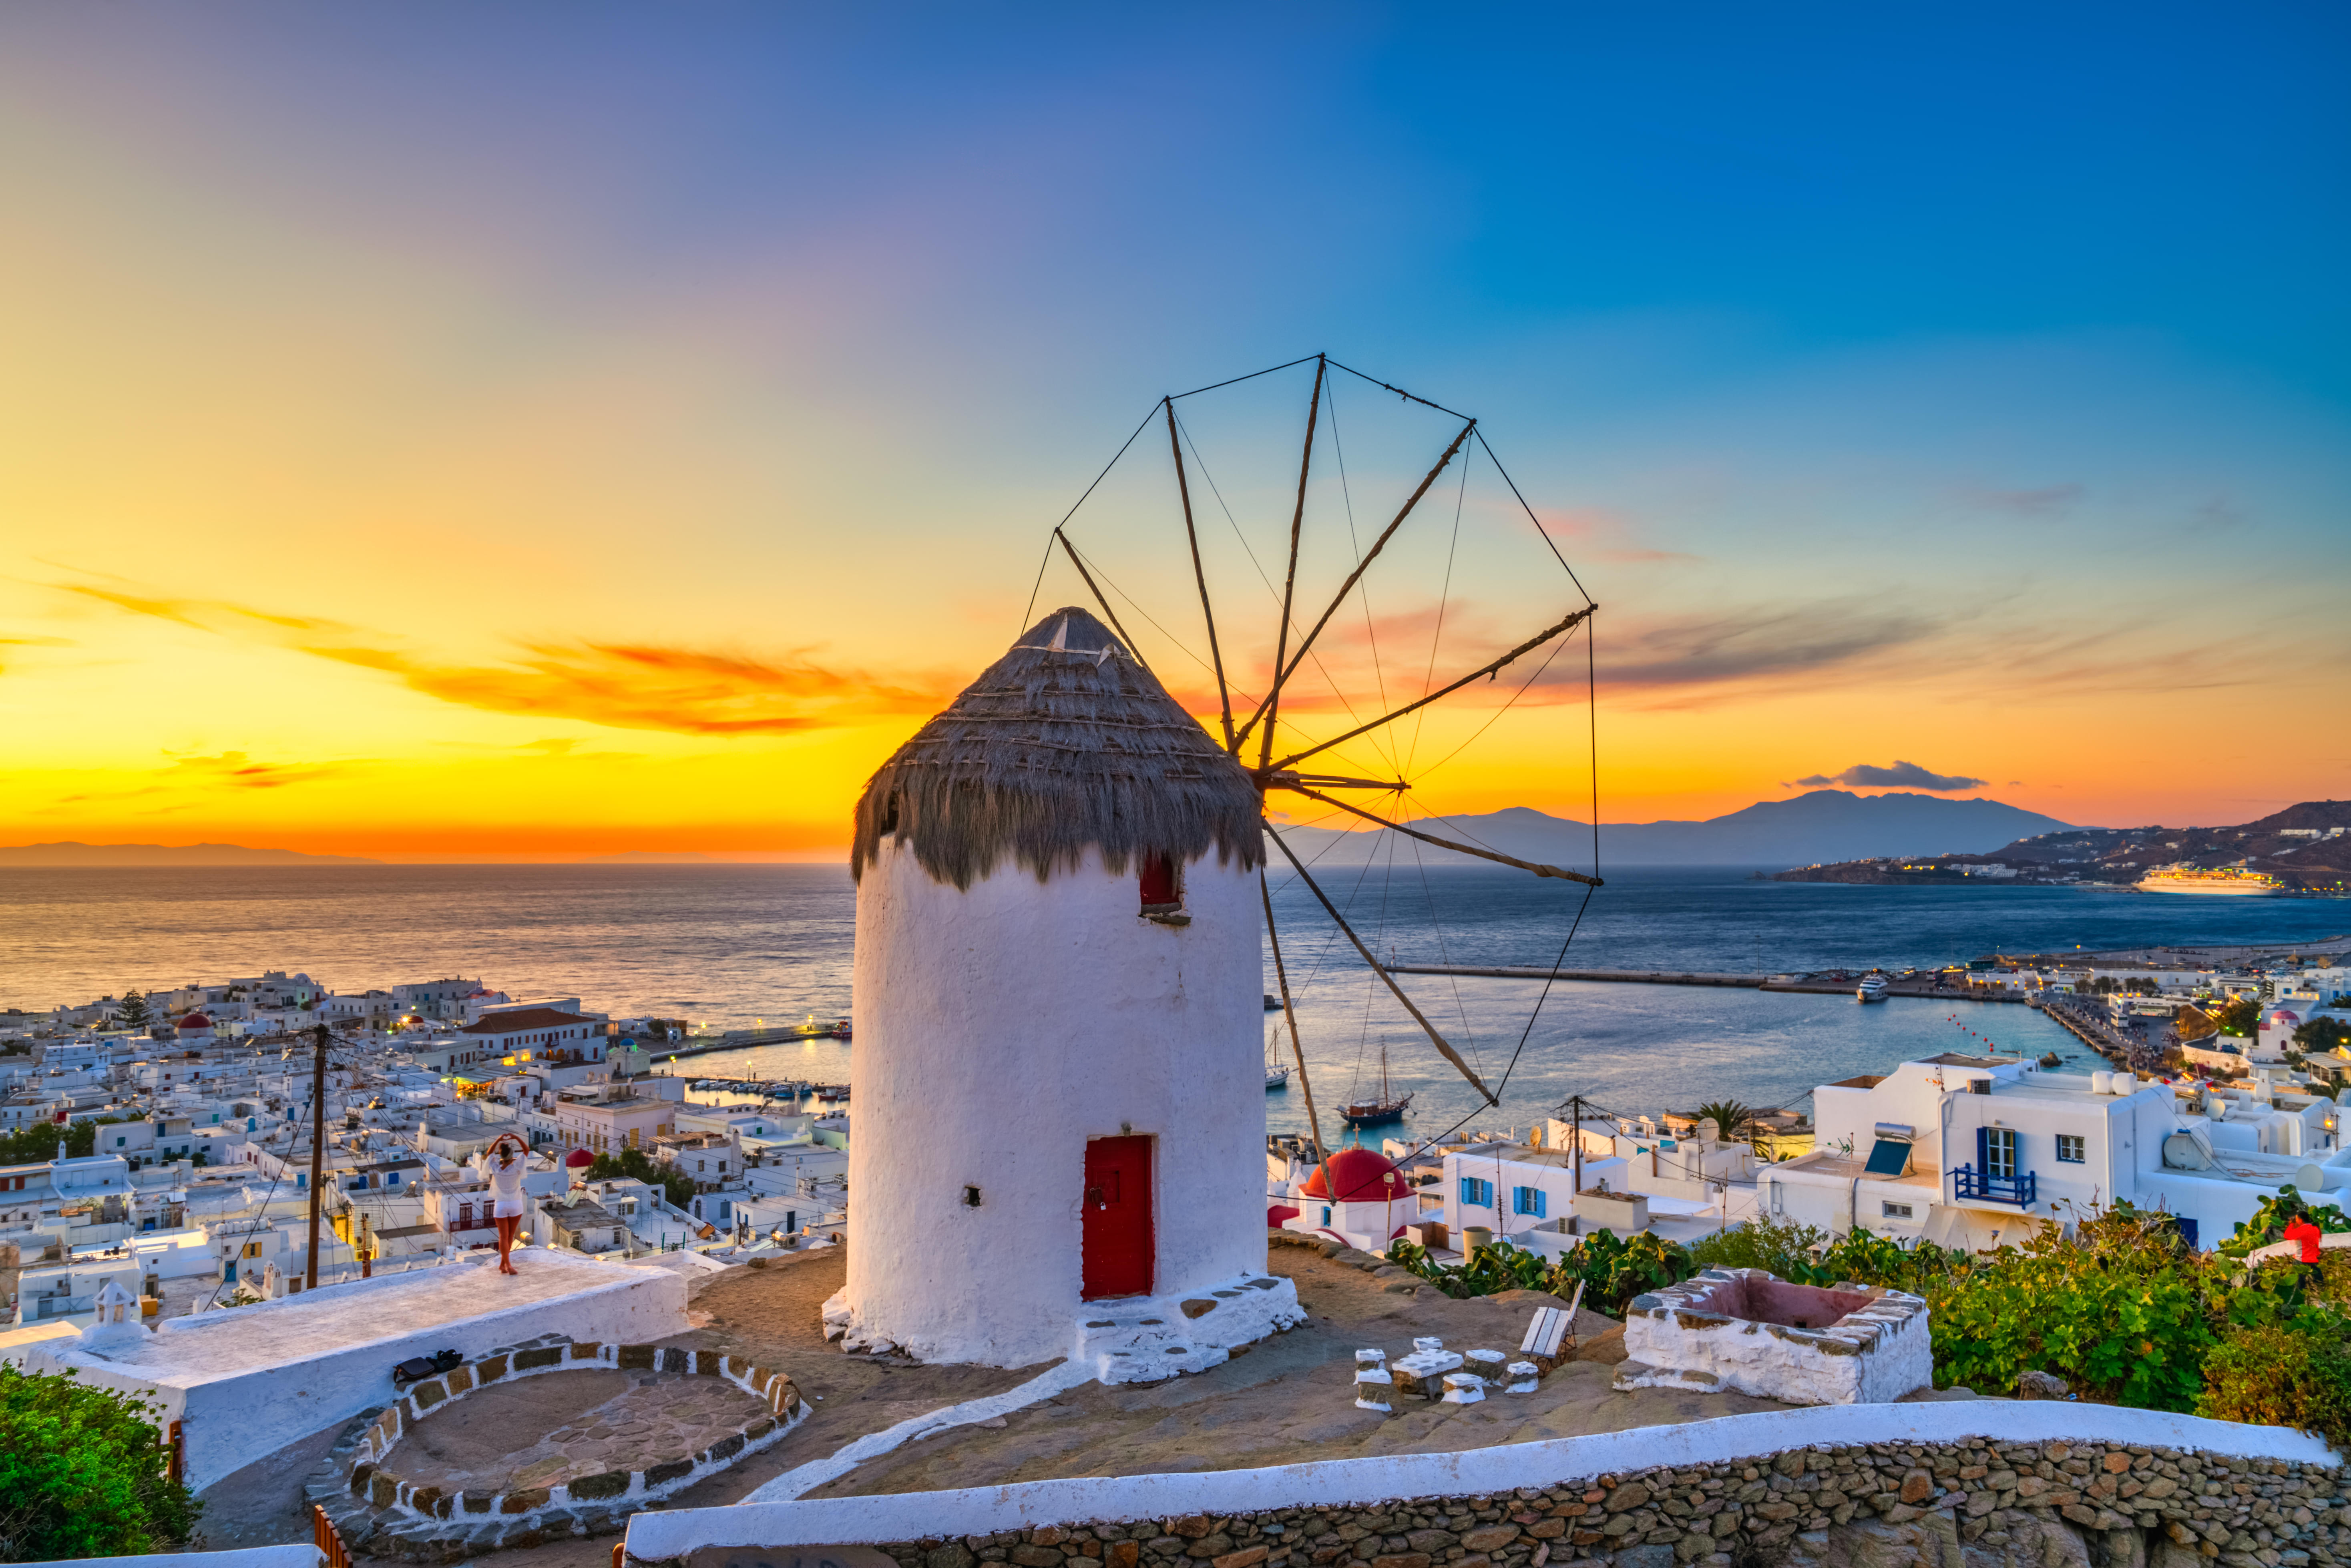 Best Places To Stay in Mykonos